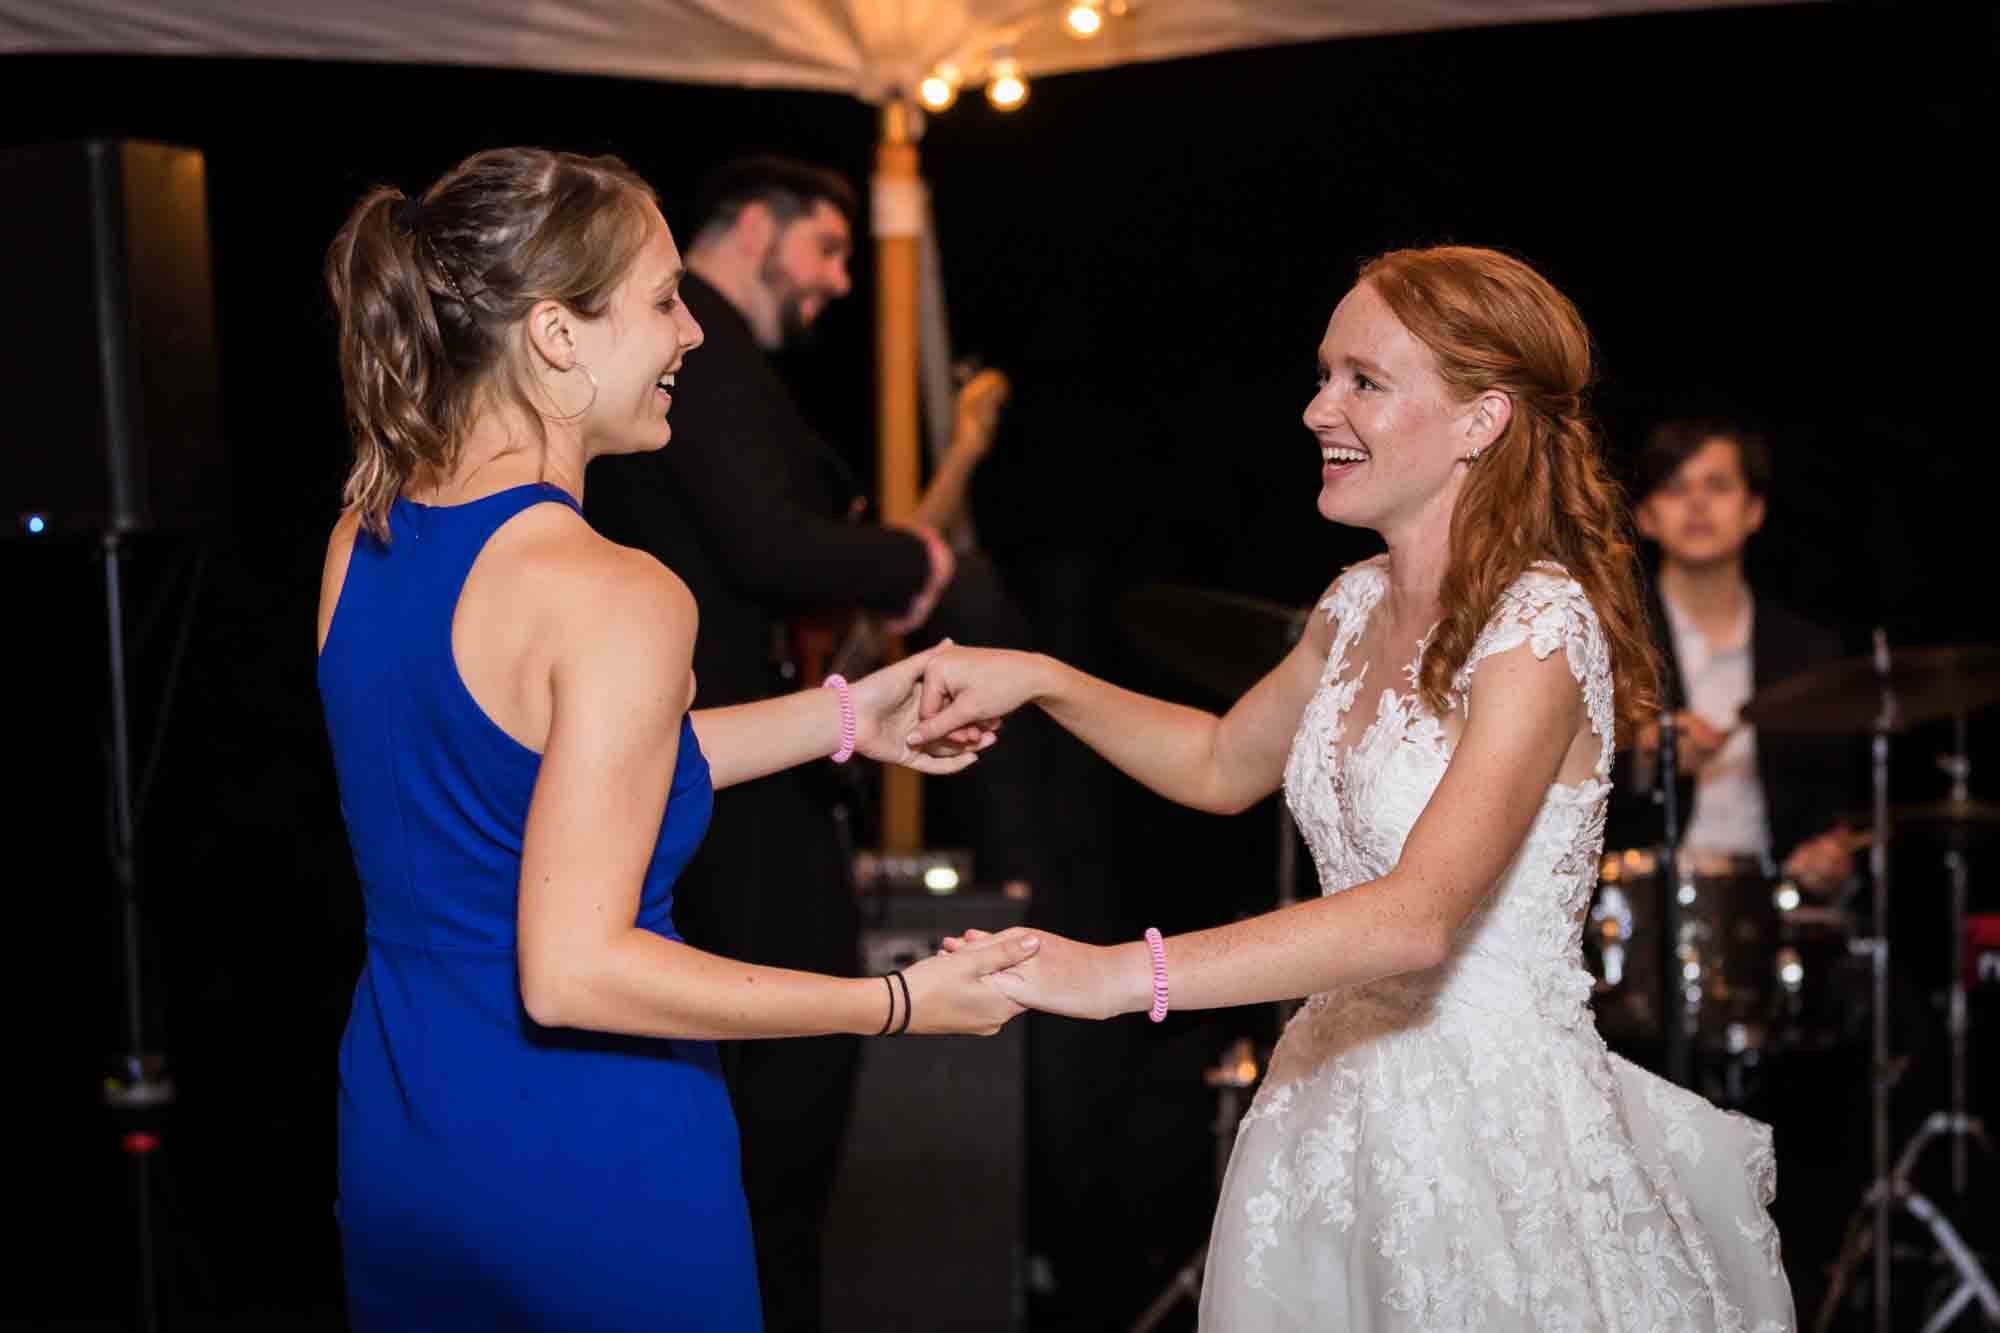 Bride and woman in blue dress holding hands and dancing